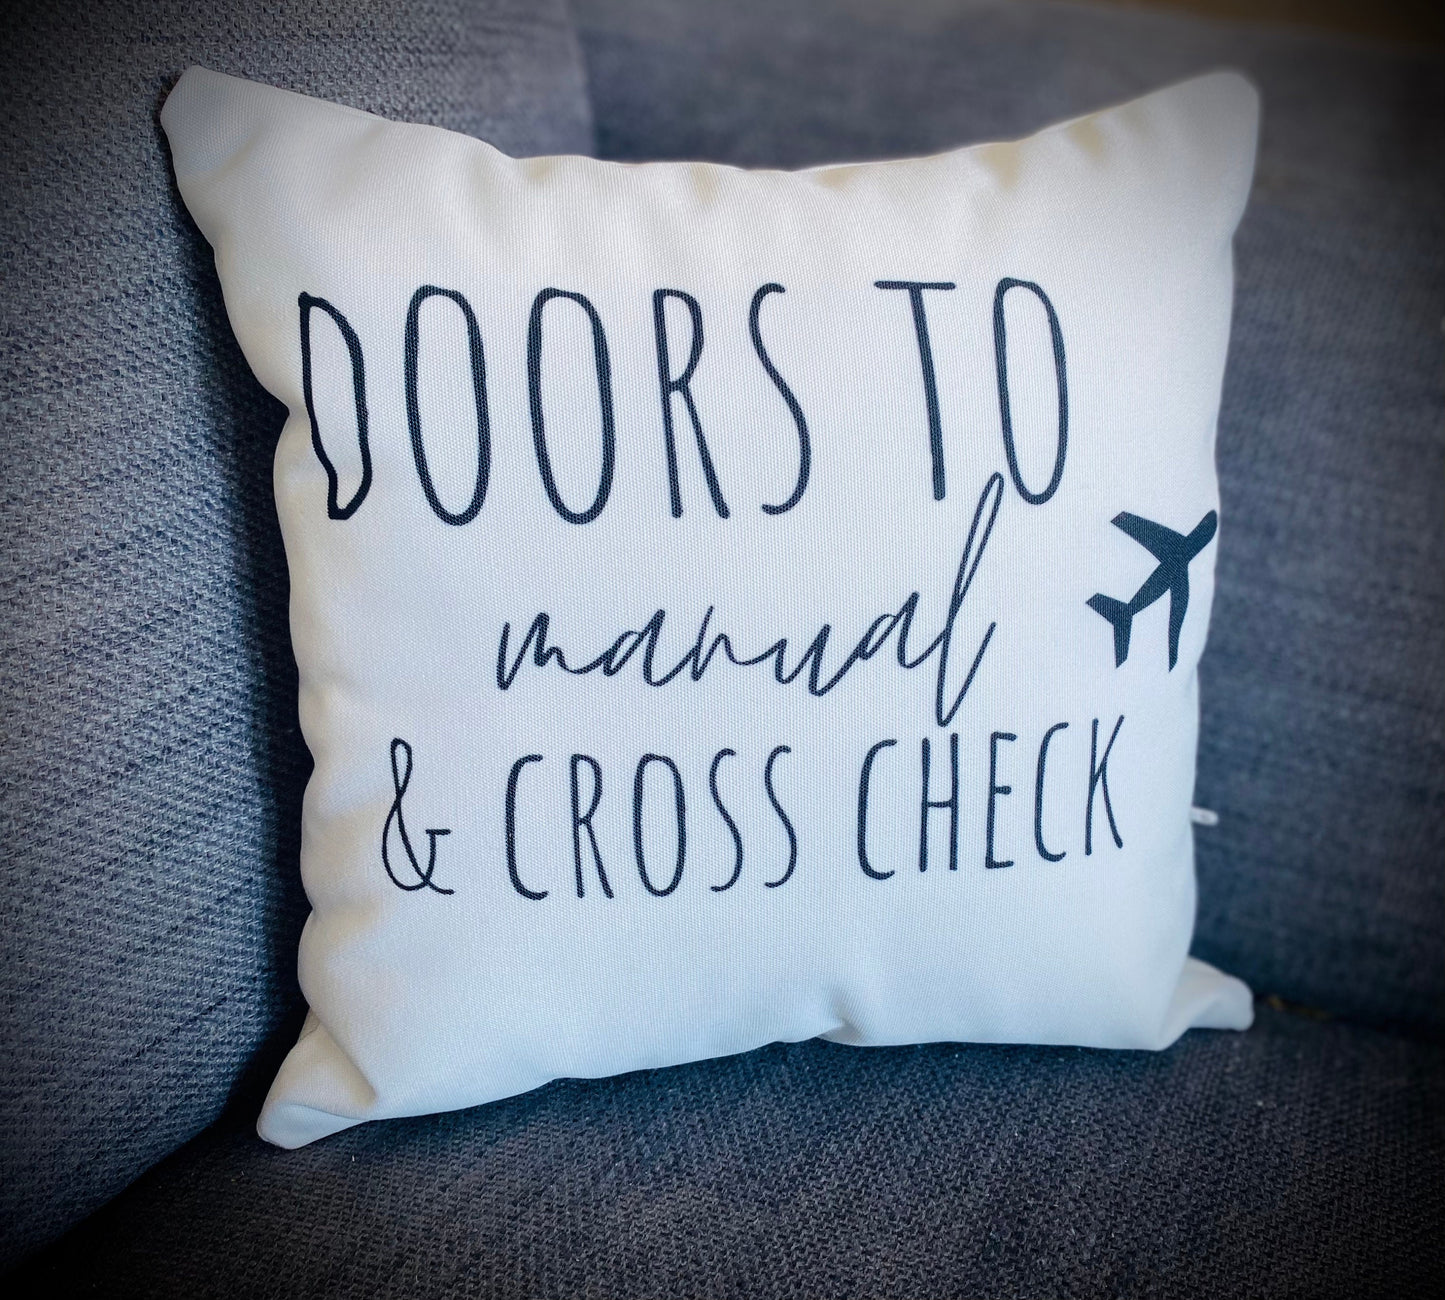 Doors To Manual and Cross Check Canvas Cushion | Cabin Crew Home Decor | Aviation Gift | Flight Attendant Accessories